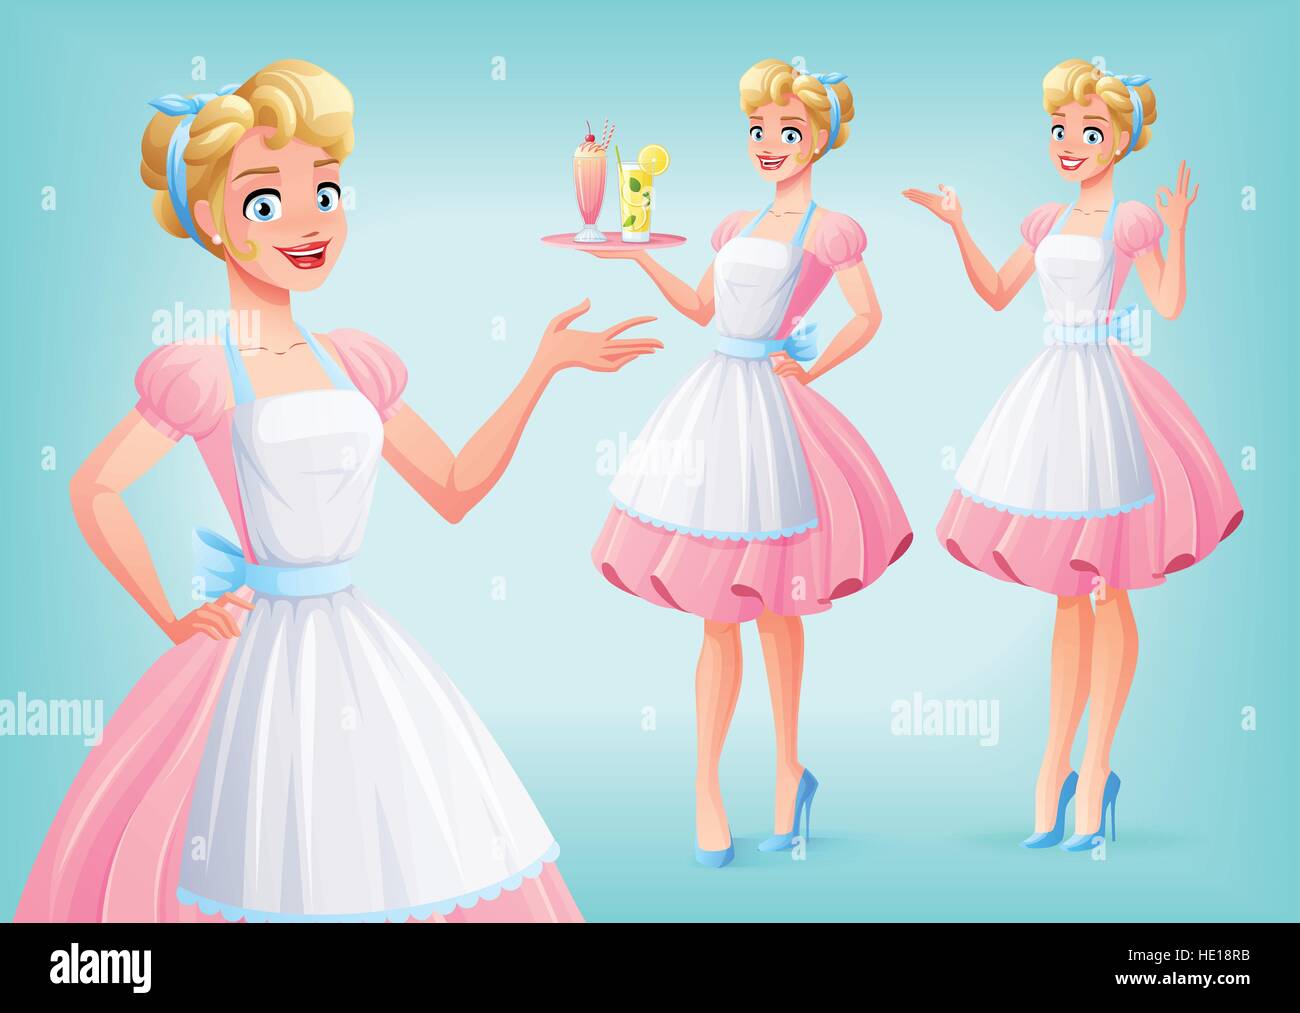 Cute smiling housewife in apron in various poses. Vector set. Stock Vector